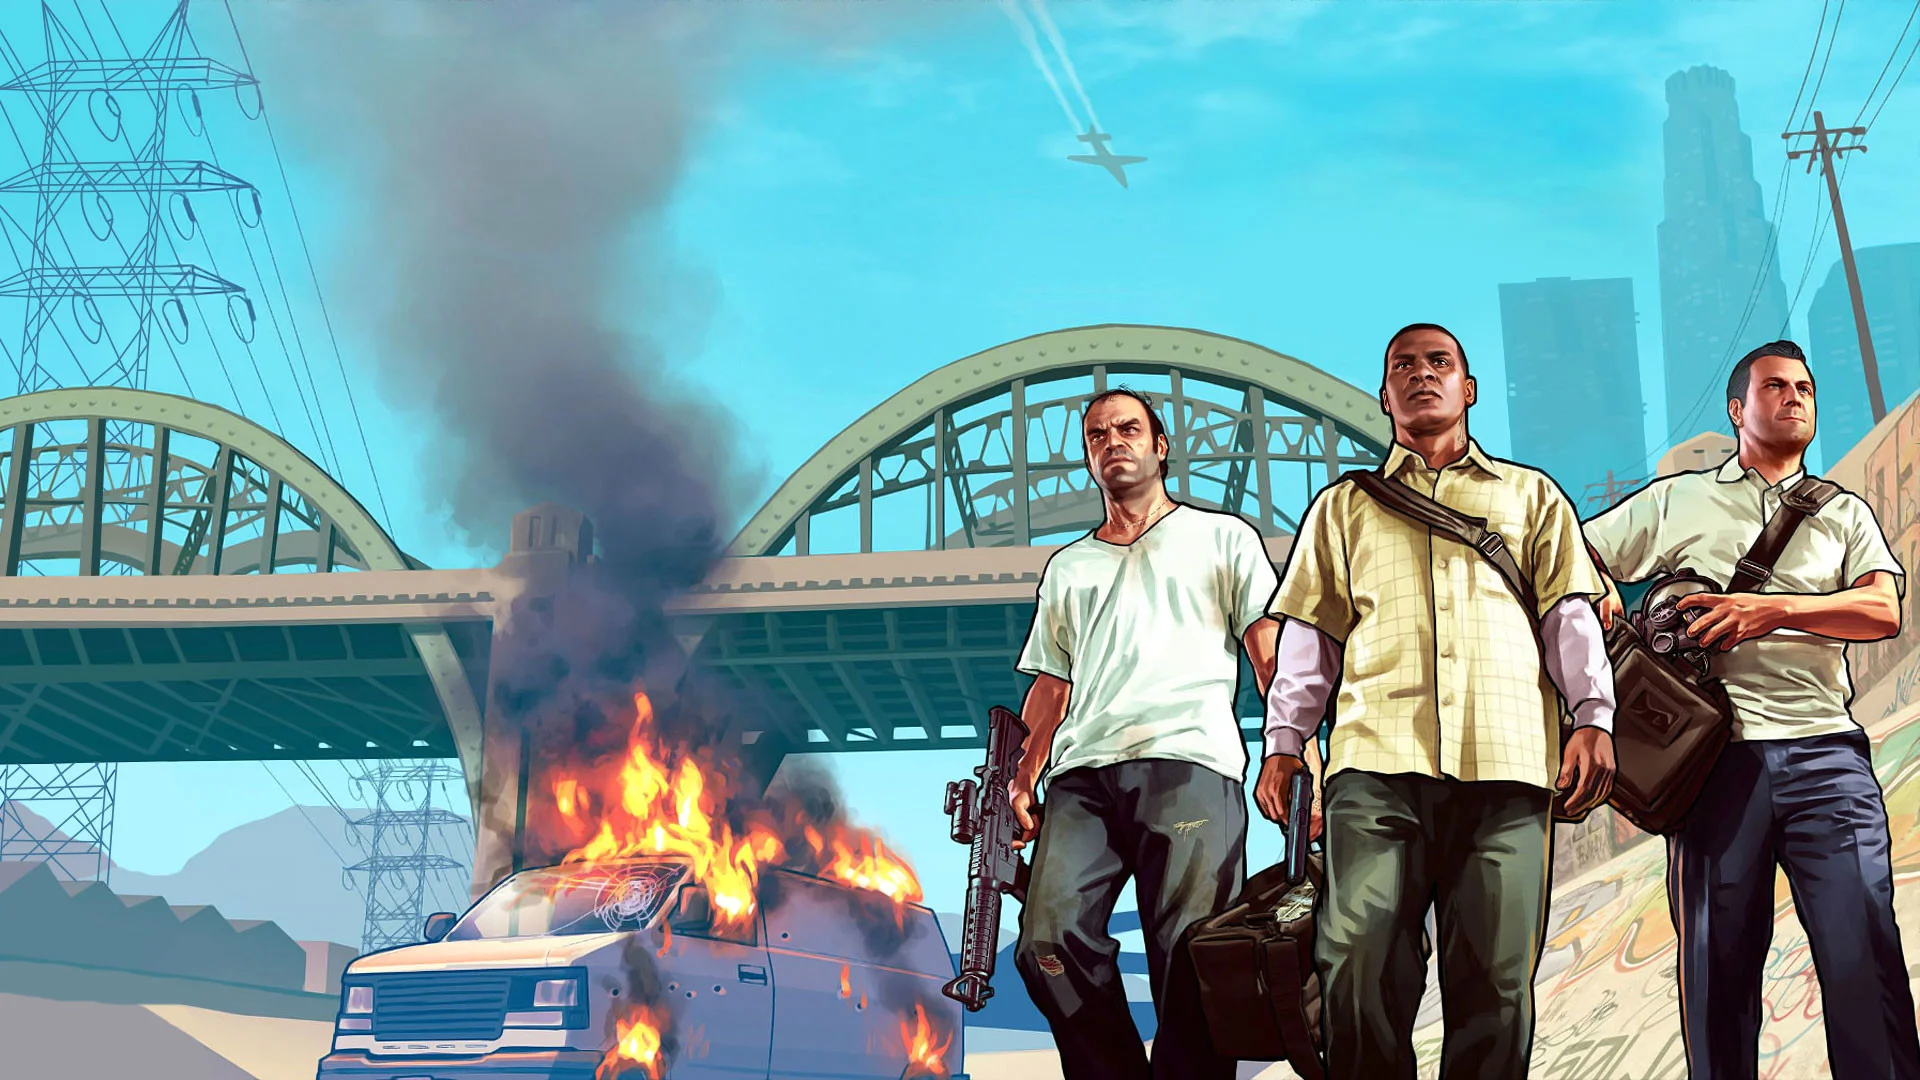 Brand new art dedicated to GTA 5 has appeared